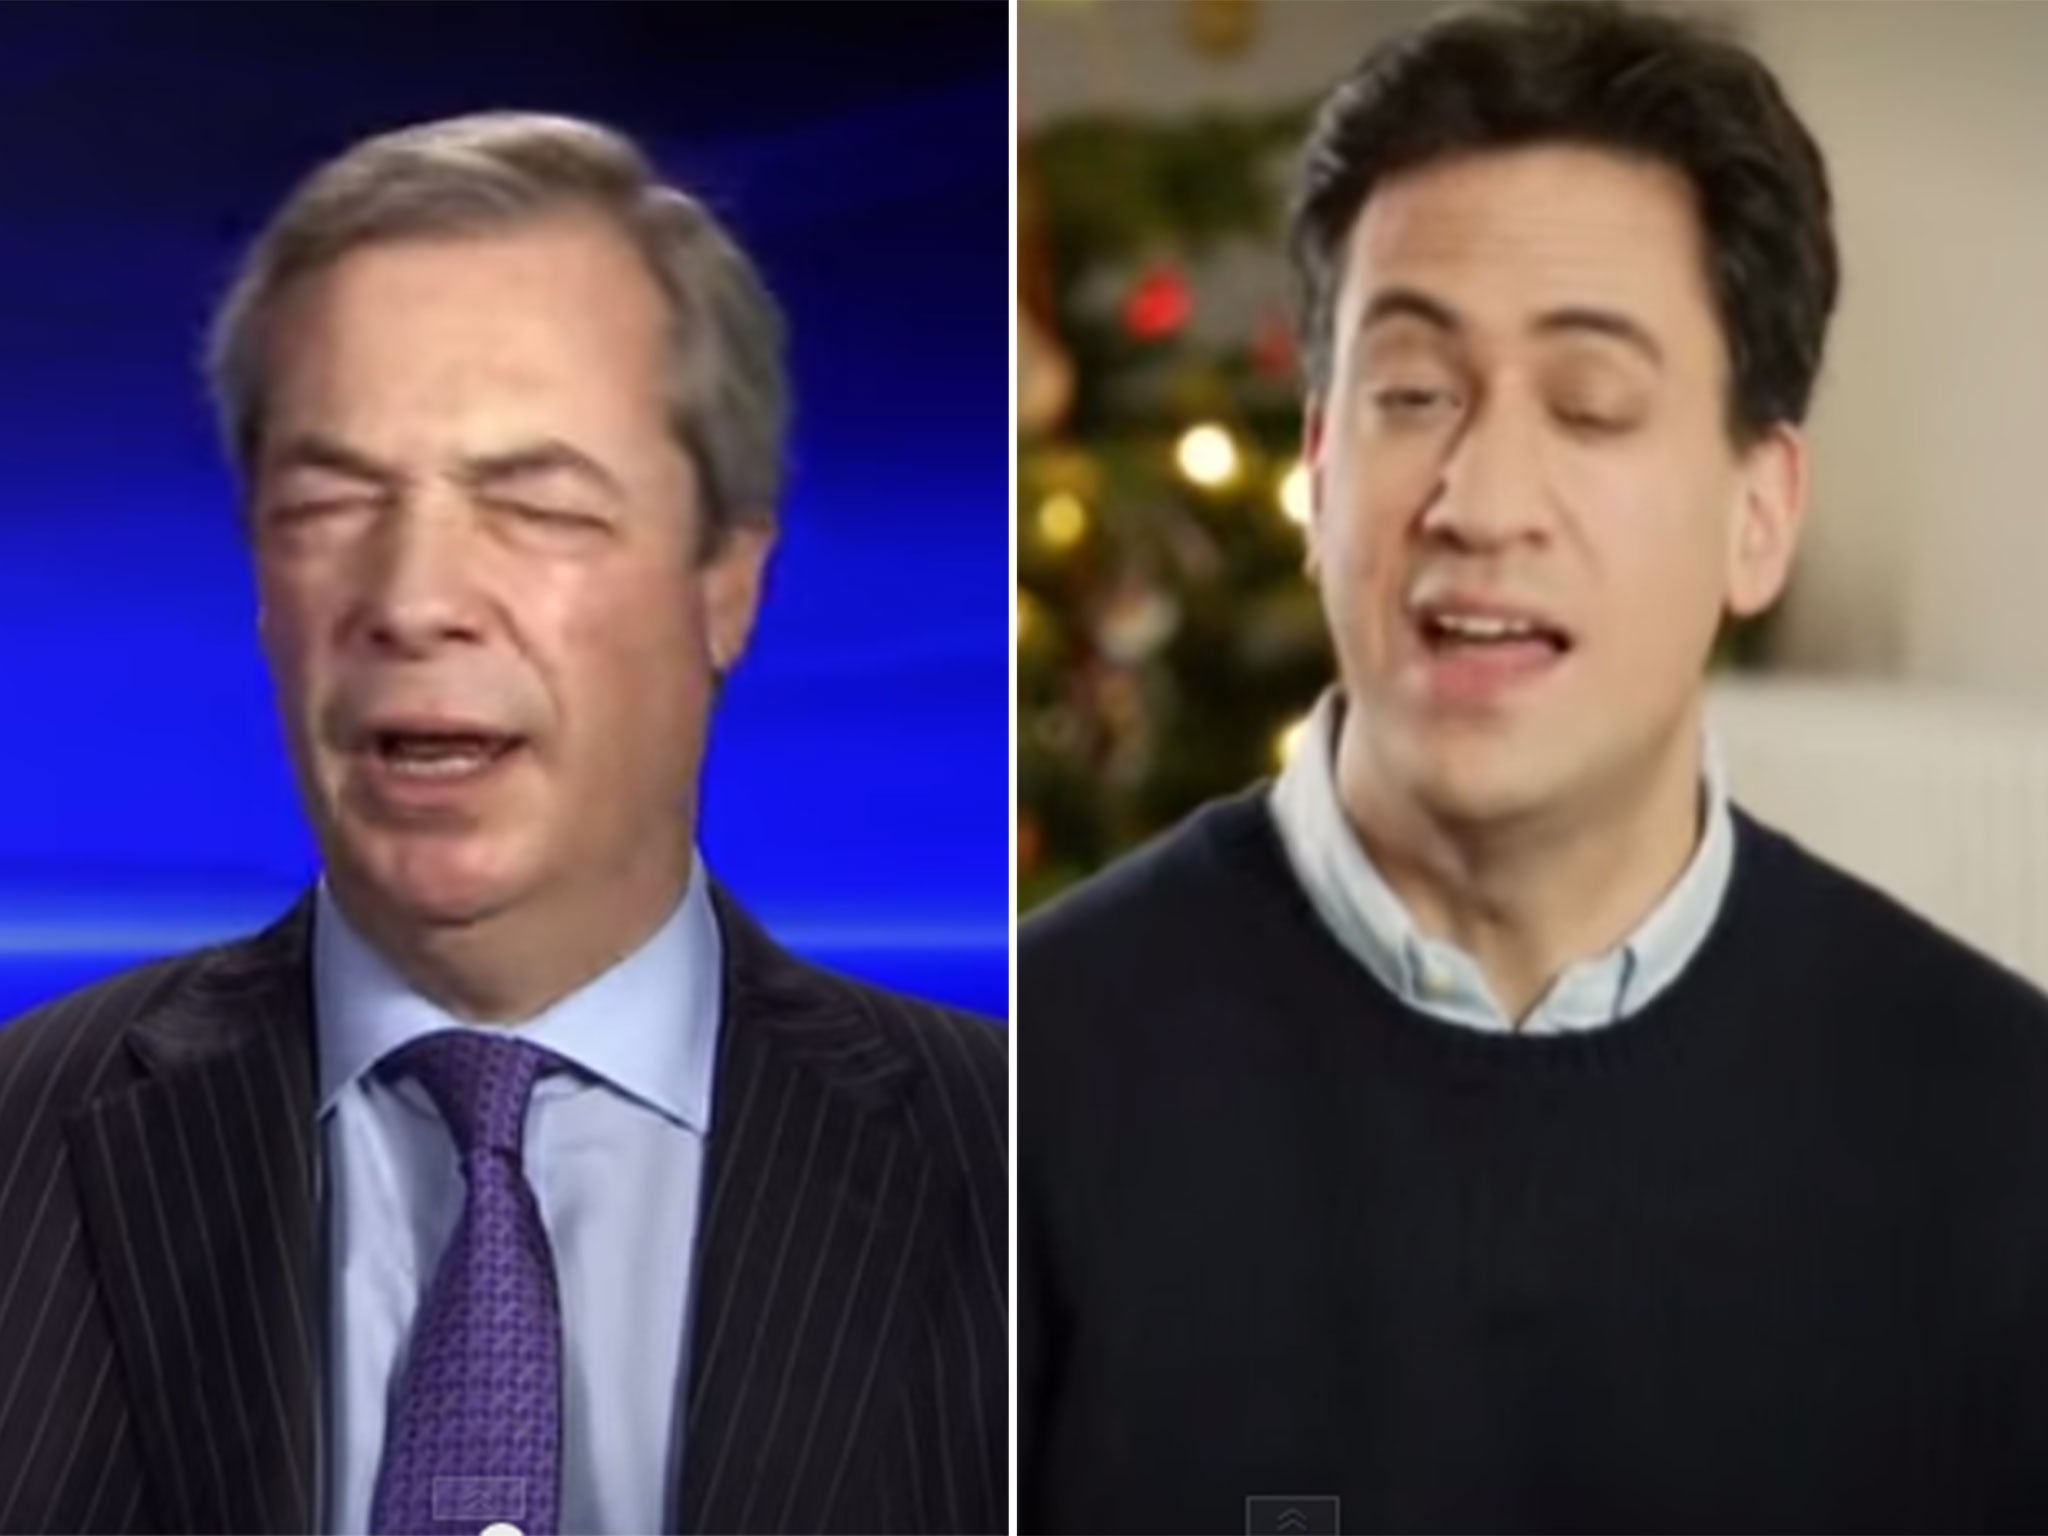 Ed Miliband and Nigel Farage singing their hearts out